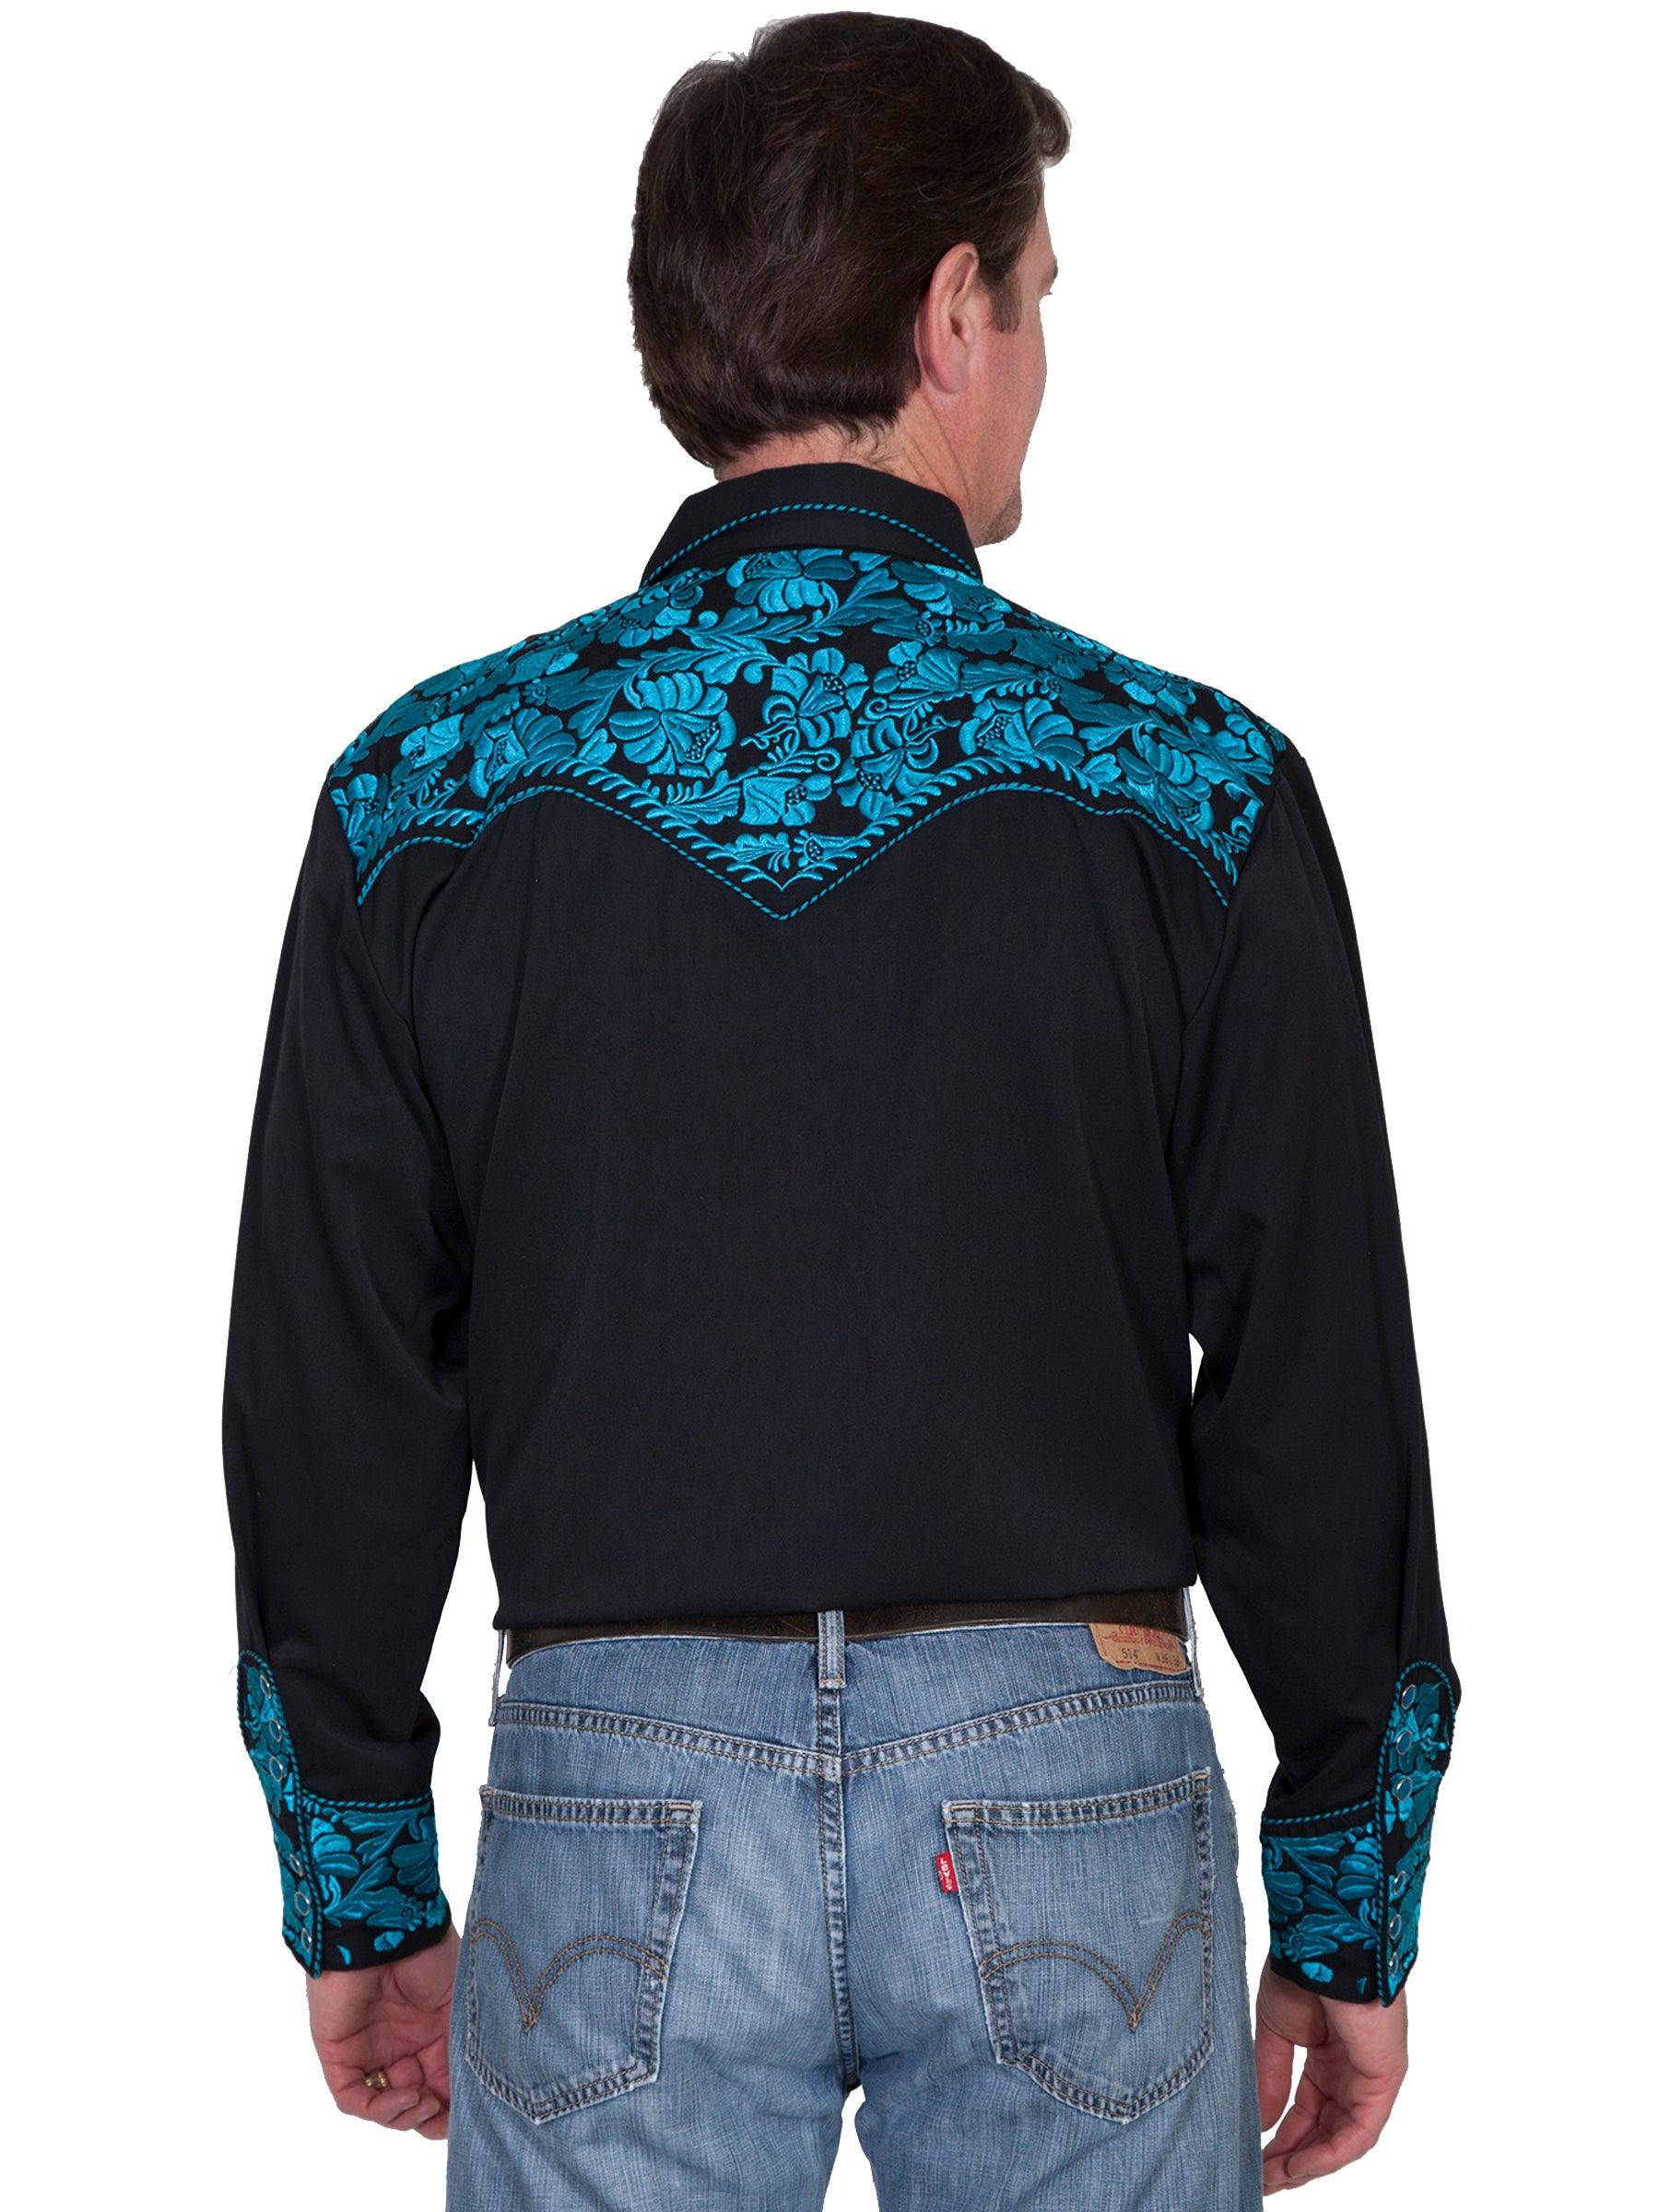 Scully TURQUOISE FLORAL TOOLED EMBROIDERY SHIRT - Flyclothing LLC